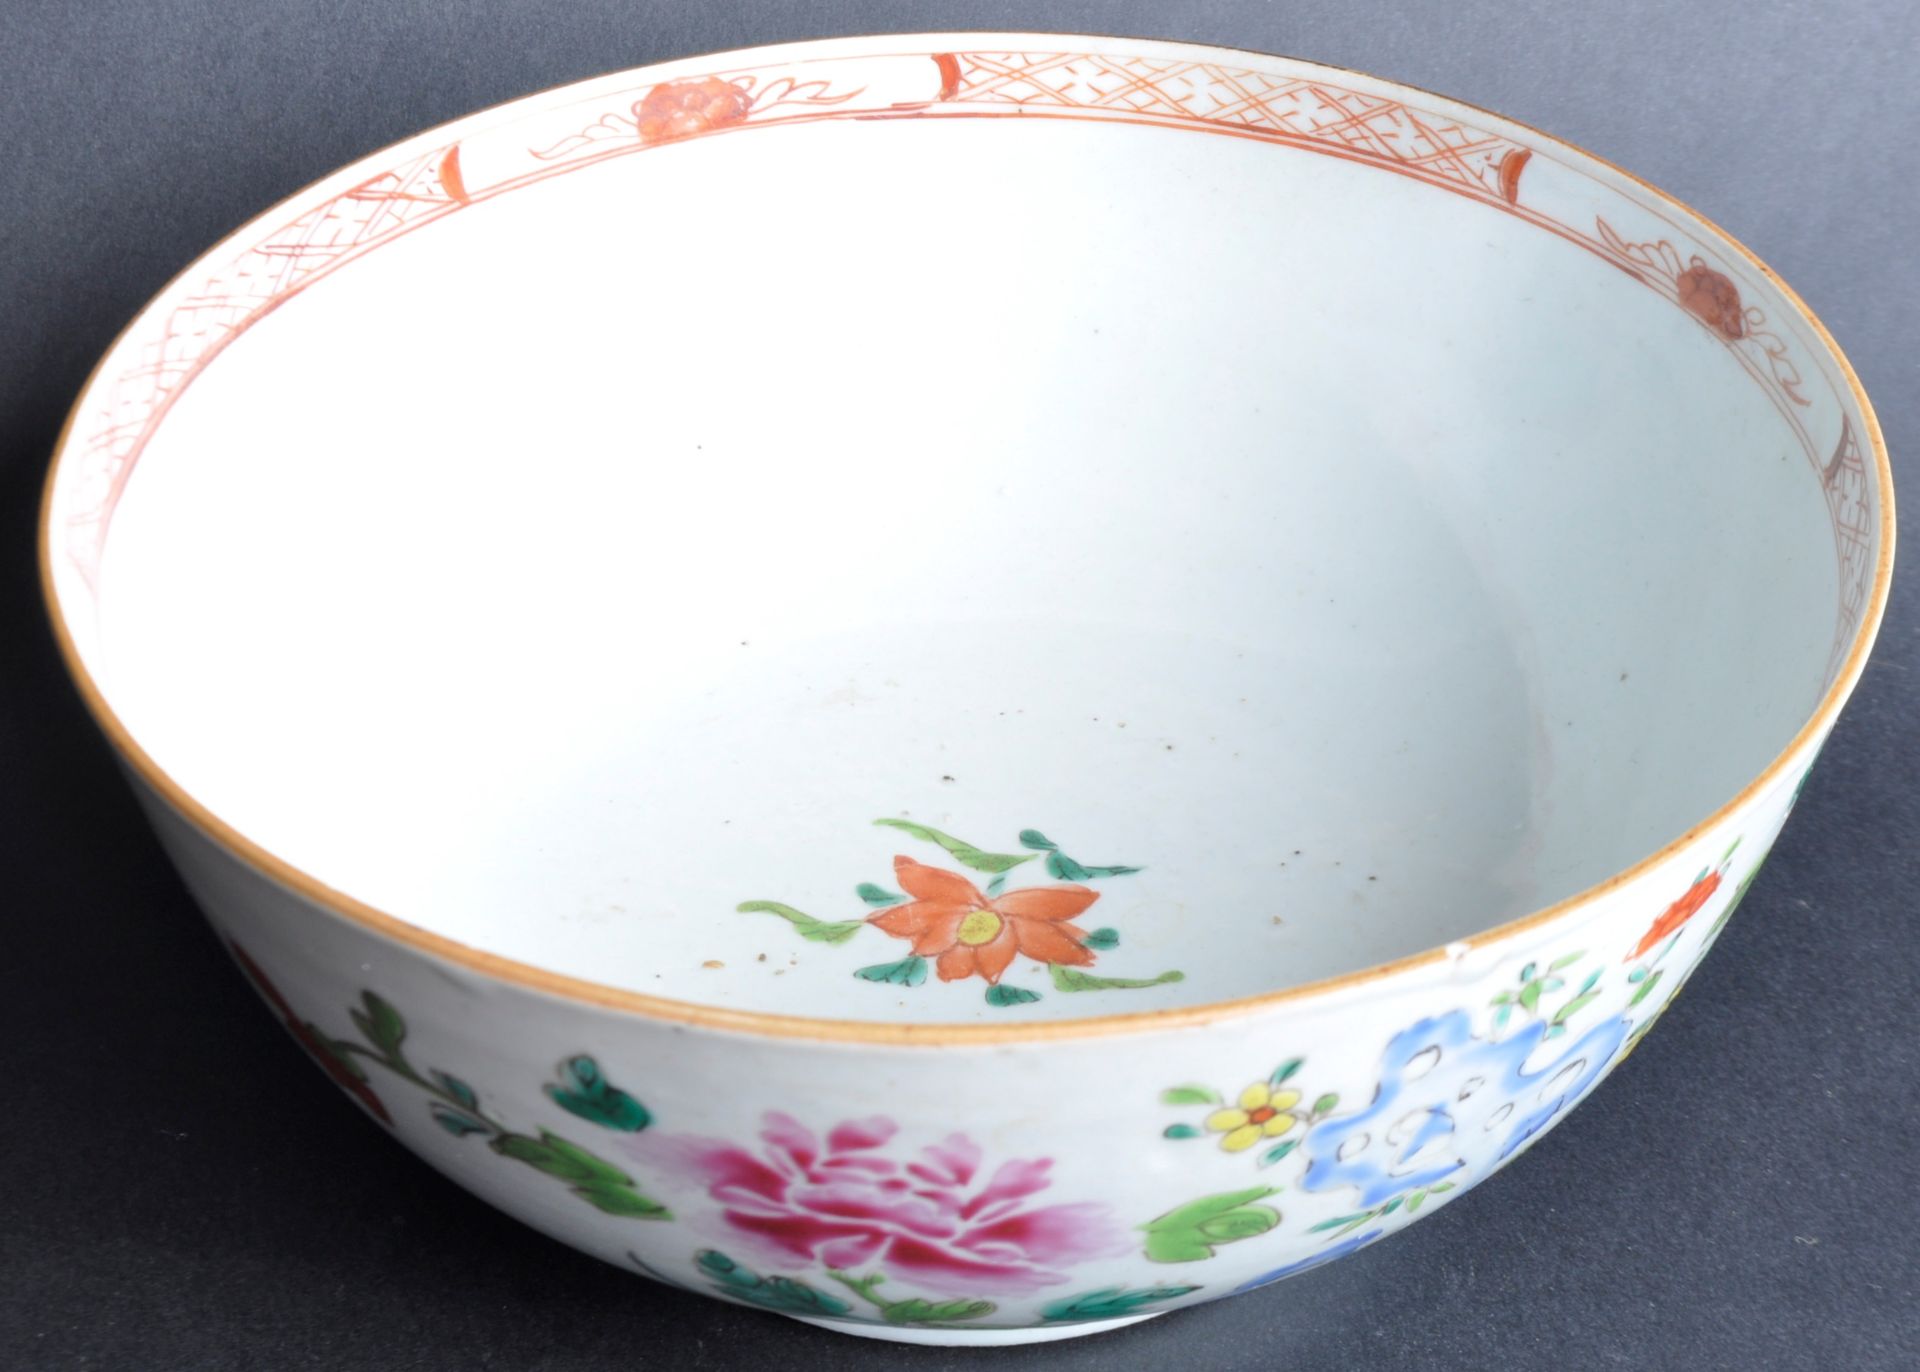 19TH CENTURY CHINESE PORCELAIN BOWL - Image 2 of 6